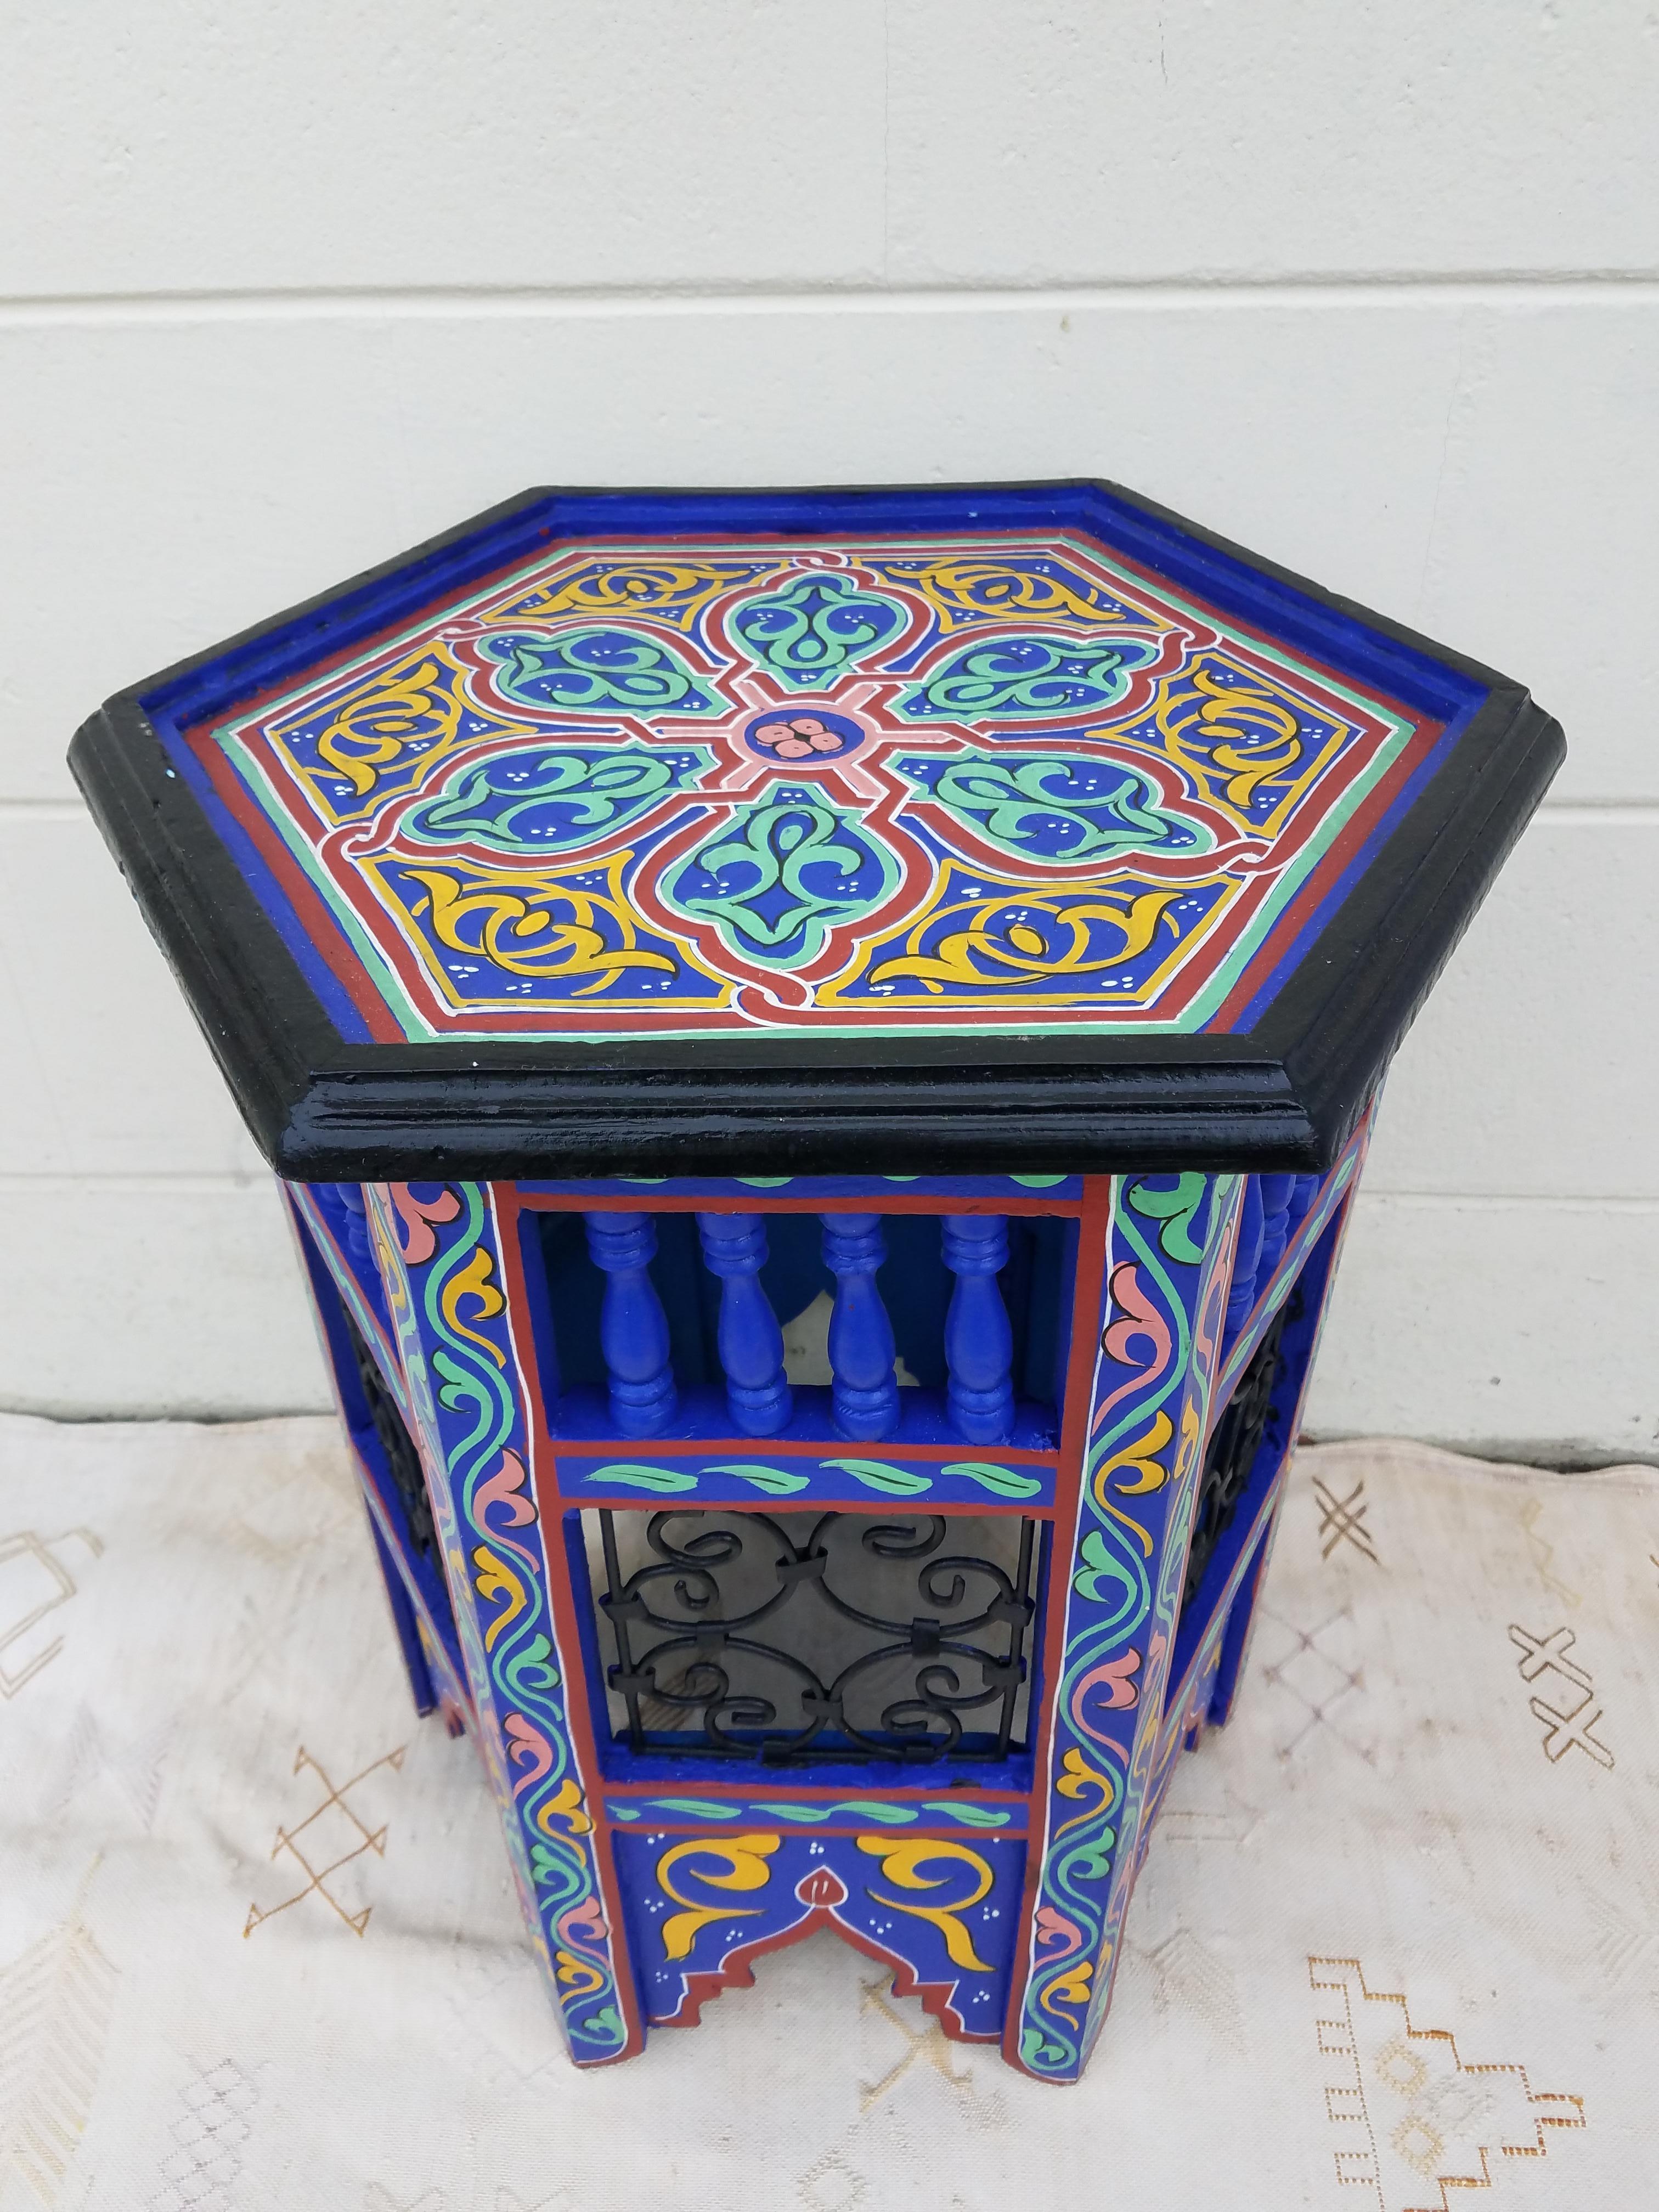 This is a 100% hand painted and hand carved Moroccan hexagonal shape side table or end table. Great handcraftsmanship throughout, featuring the famous Moroccan metal scroll work. Beautiful add-on to your home or office decor. This table measures